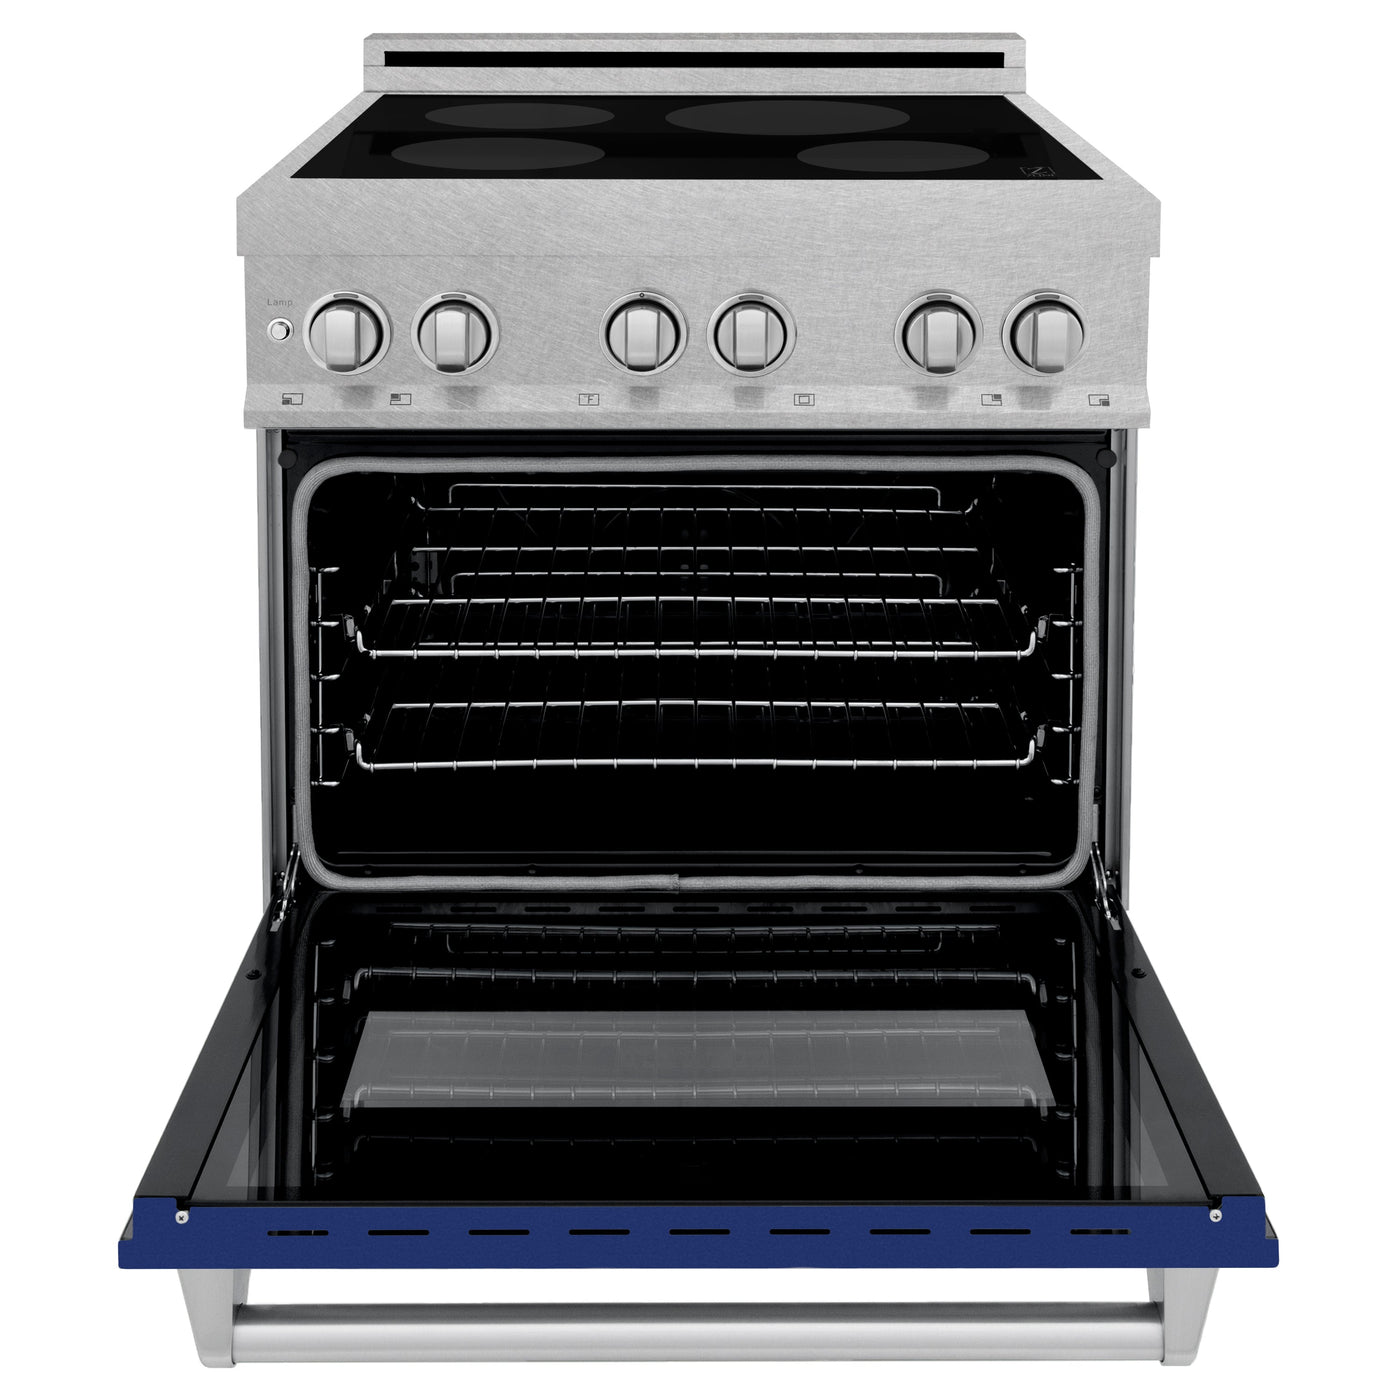 ZLINE 30" 4.0 cu. ft. Induction Range with a 4 Element Stove and Electric Oven (RAINDS-30)